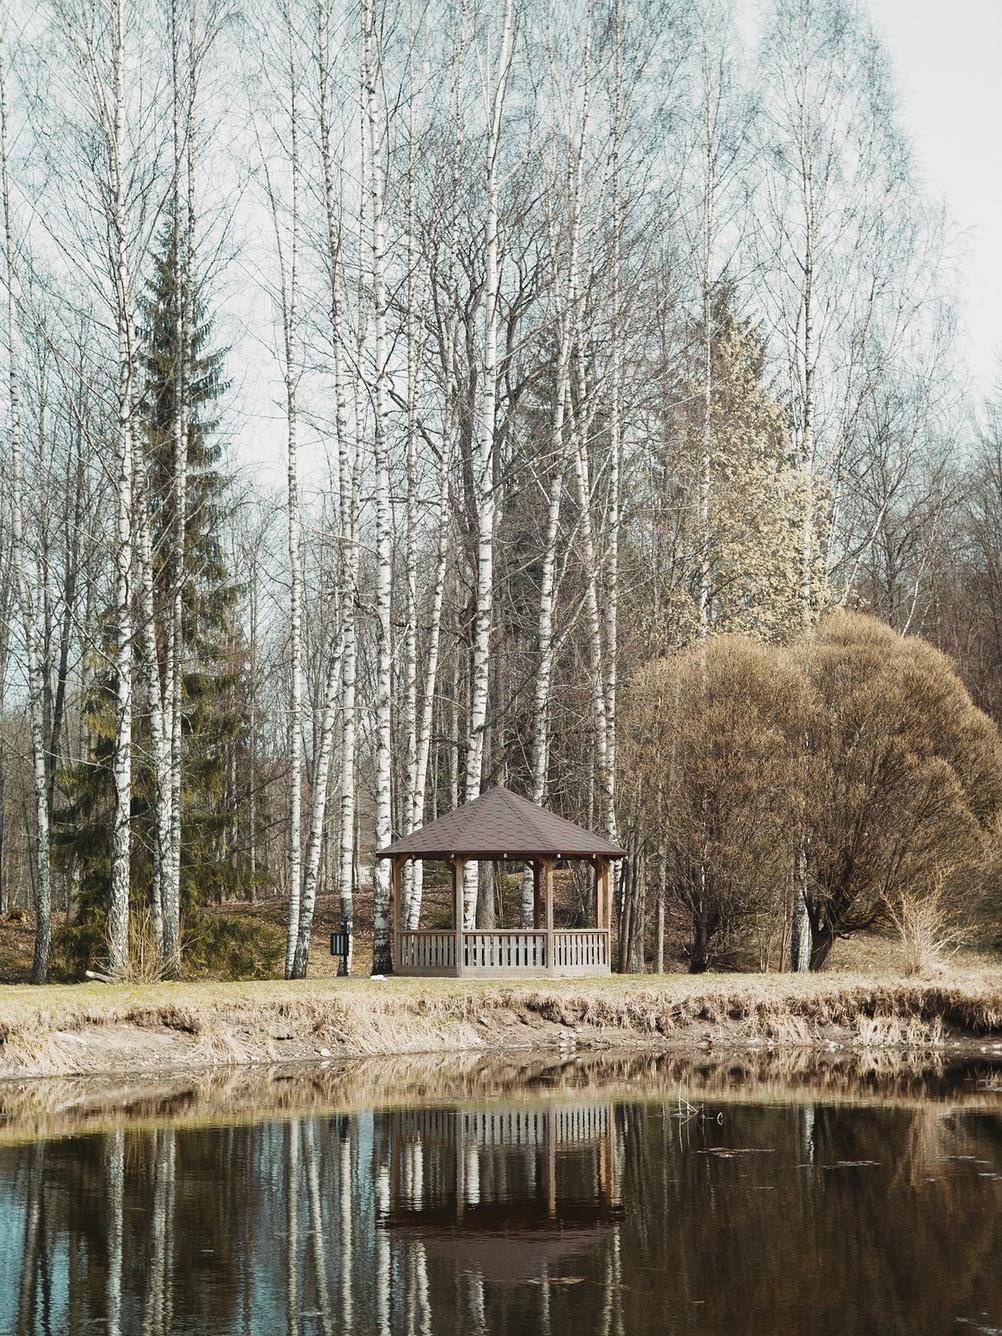 Photo of a small building reflected in a pond.